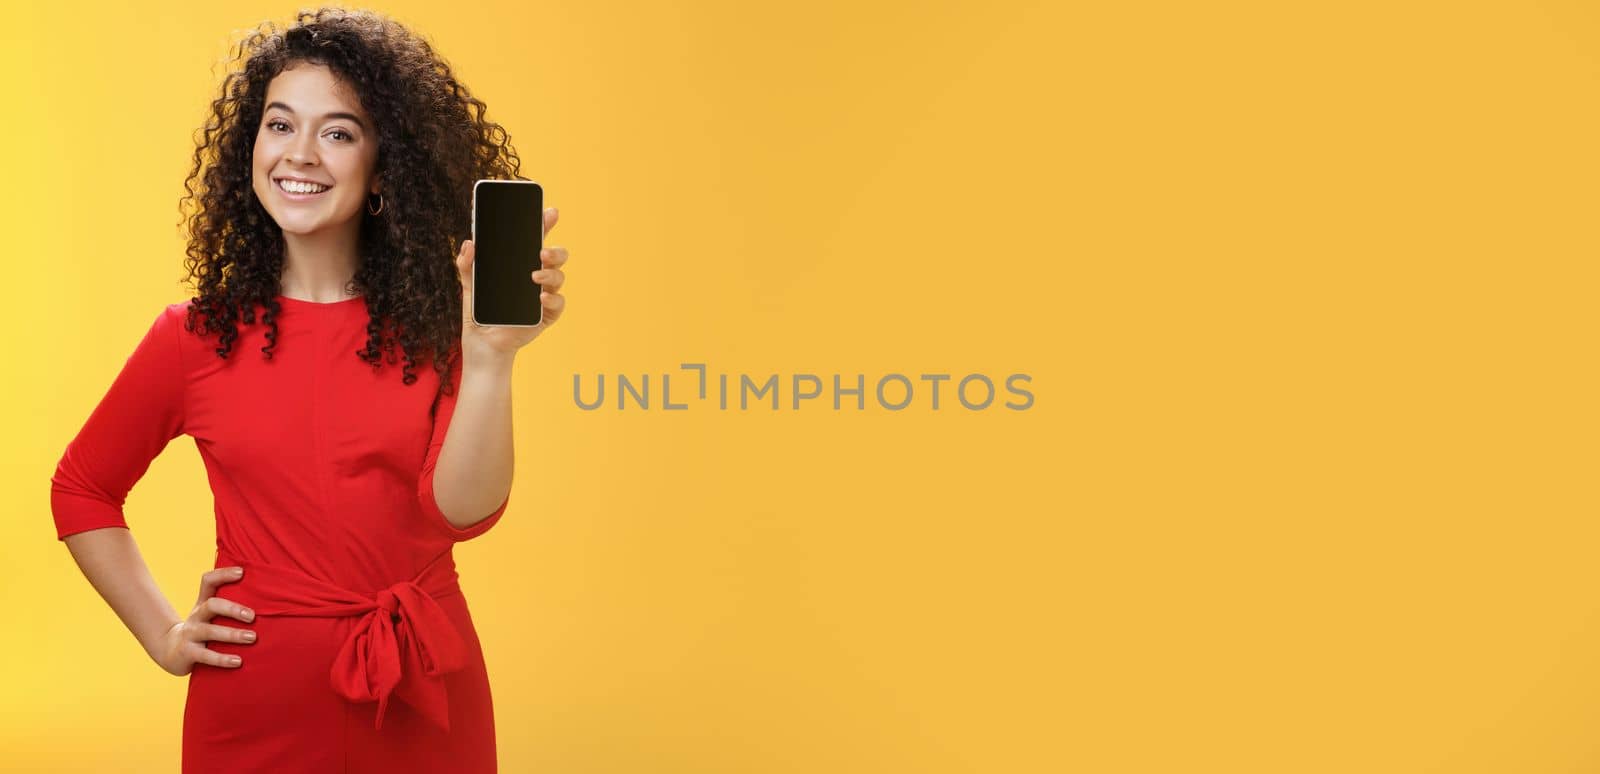 Girl brag with new phone she got on christmas feeling delighted holding mobile device in hand showing smartphone screena t camera, smiling broadly with uplifted mood over yellow background by Benzoix